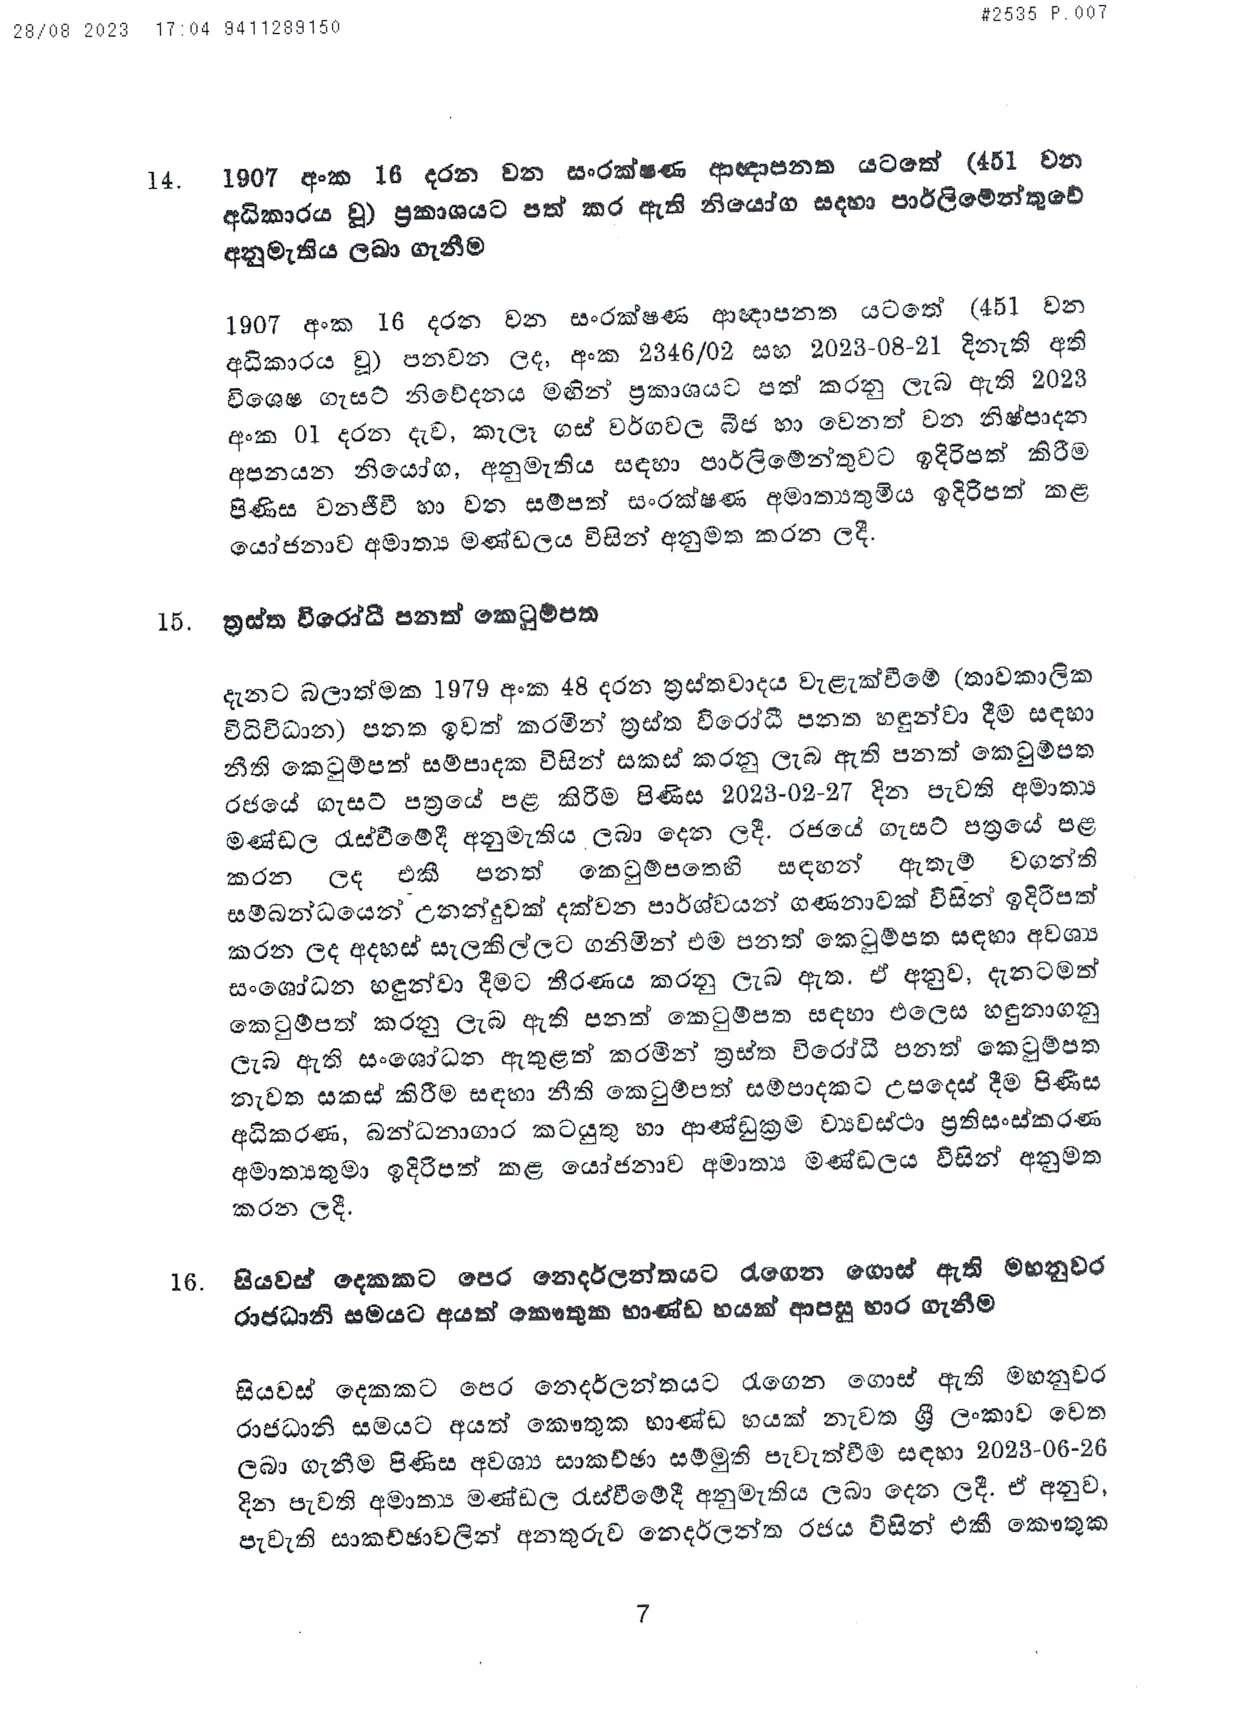 Cabinet Decision on 28.08.2023 page 007